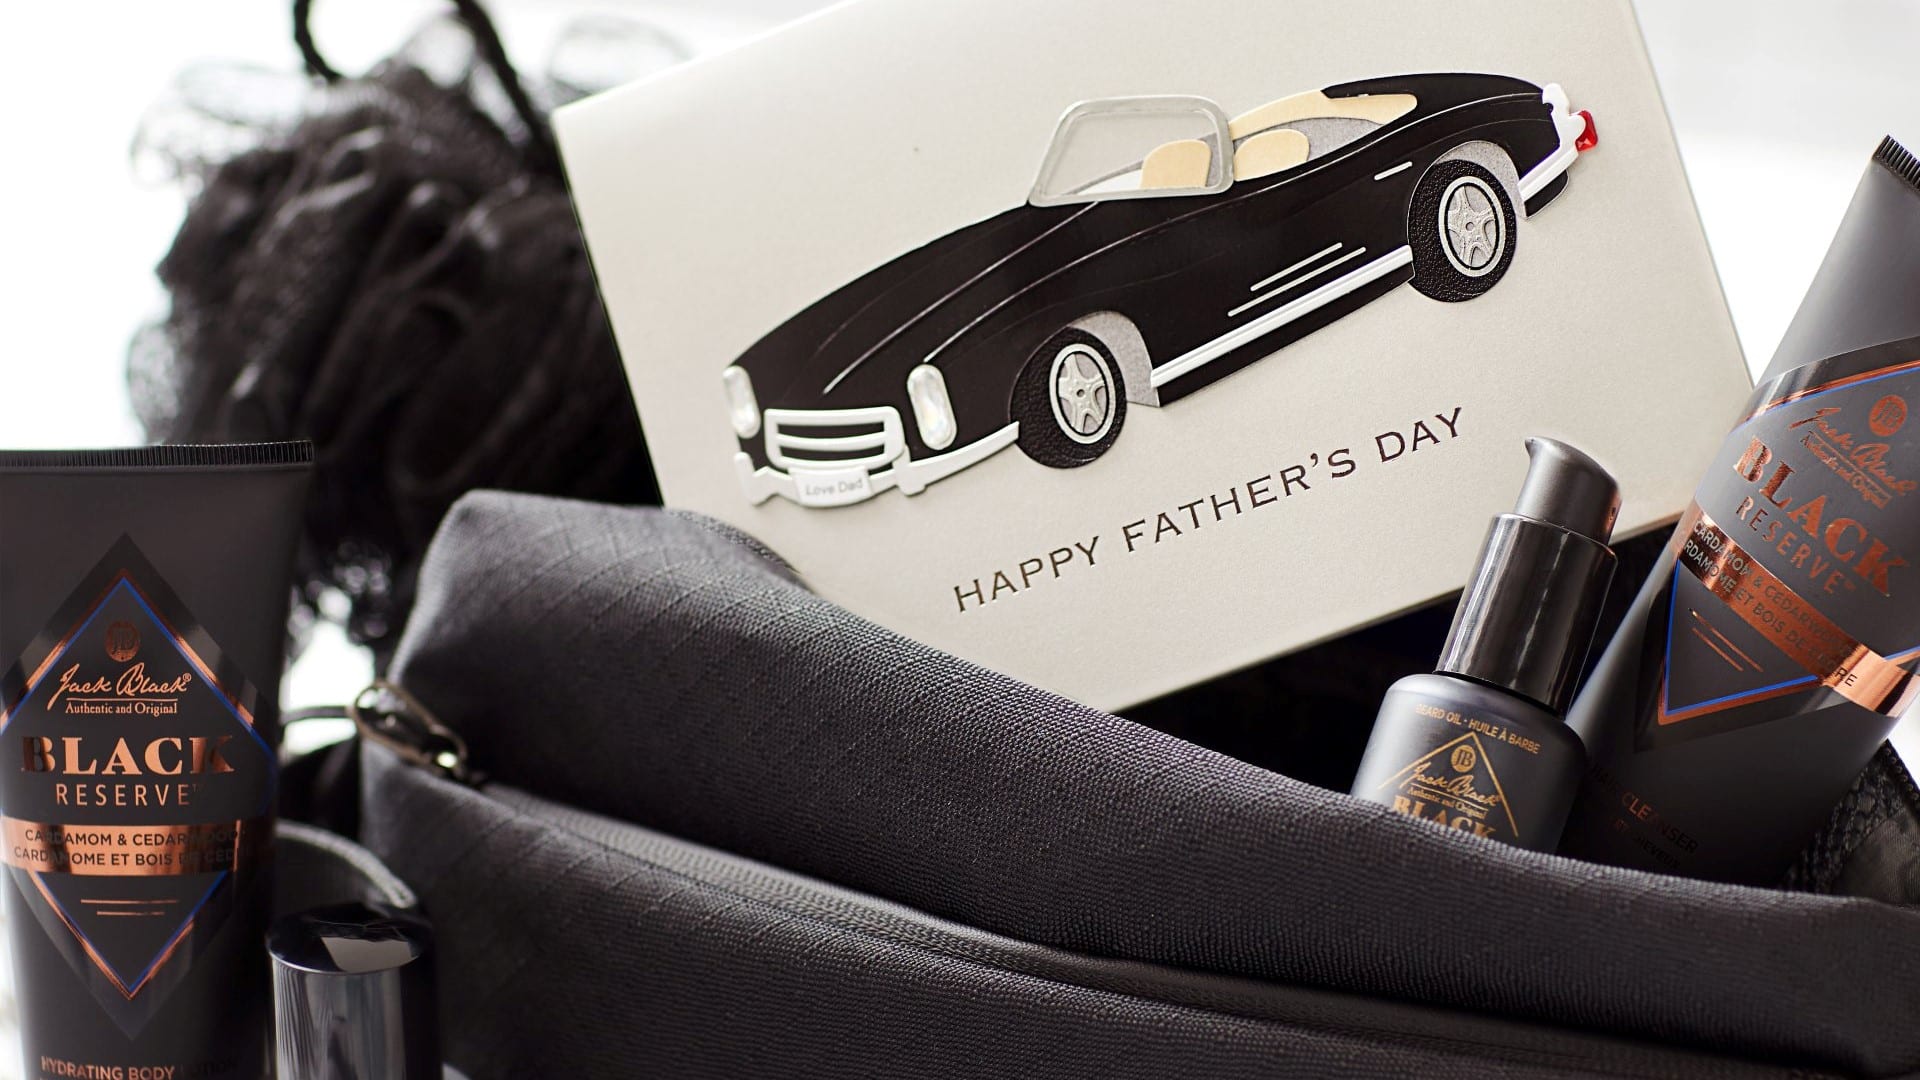 jack black skincare for fathers day gifts